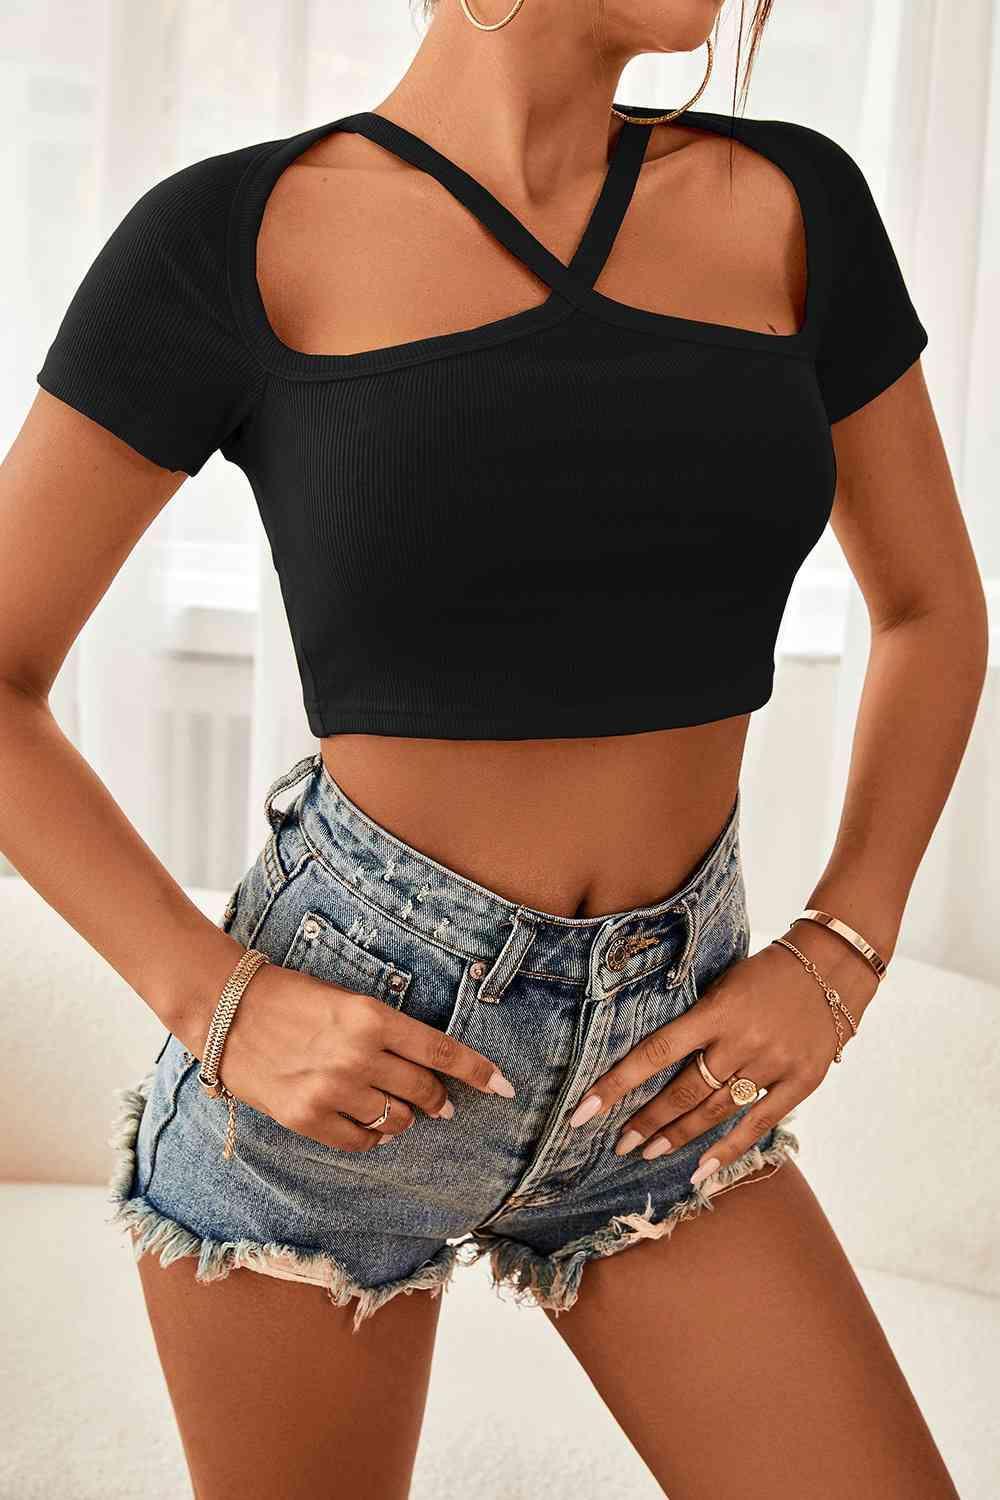 a woman wearing a black crop top and denim shorts